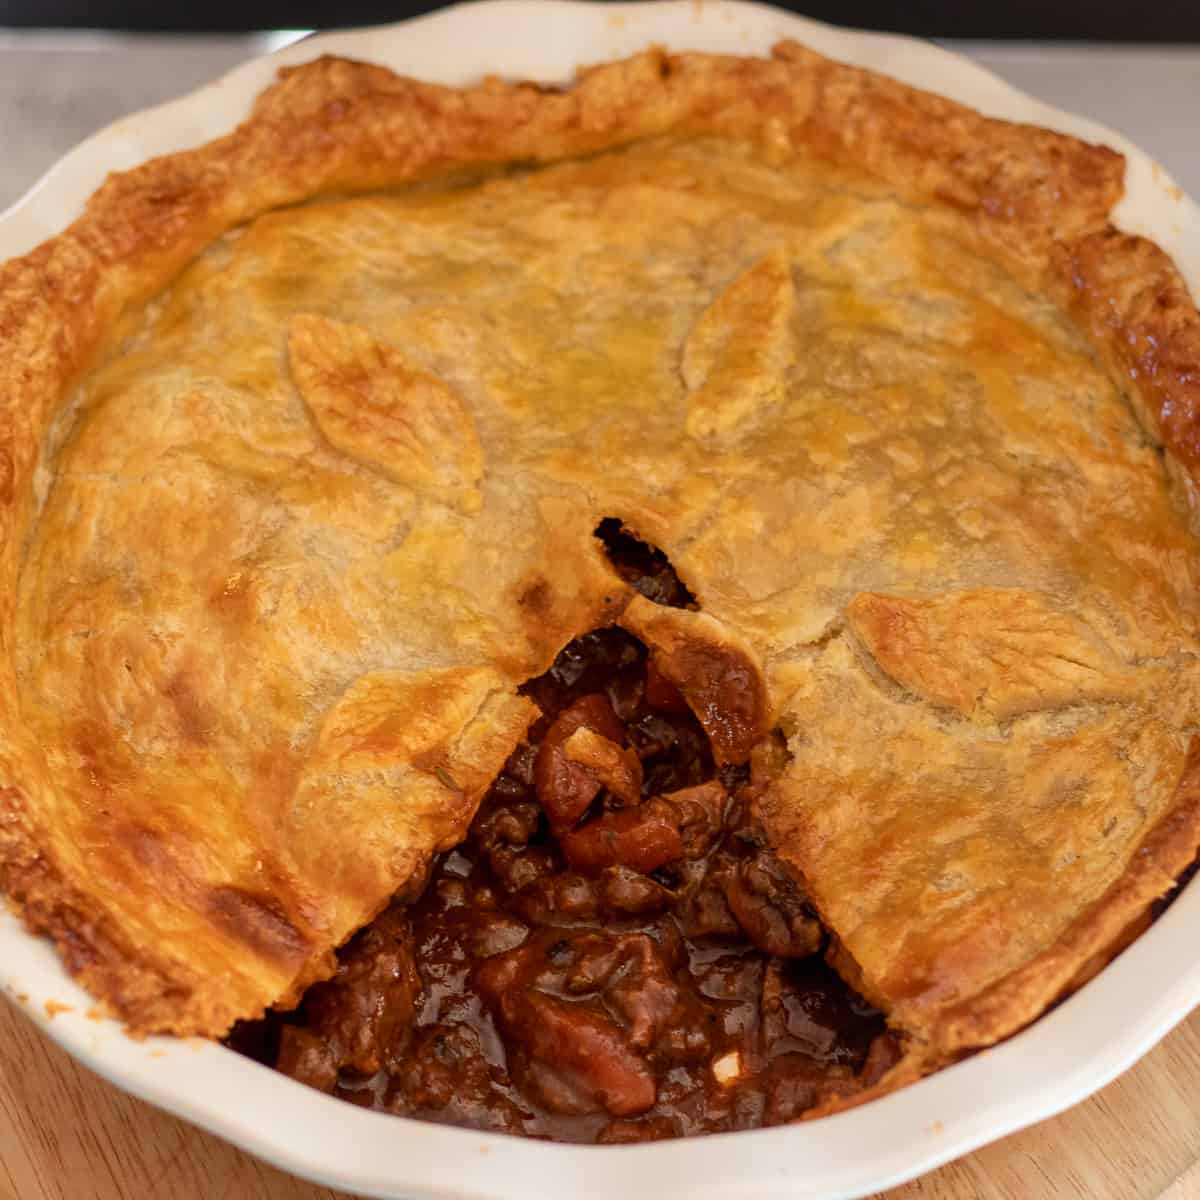 a portion of steak pie is removed from the pie dish